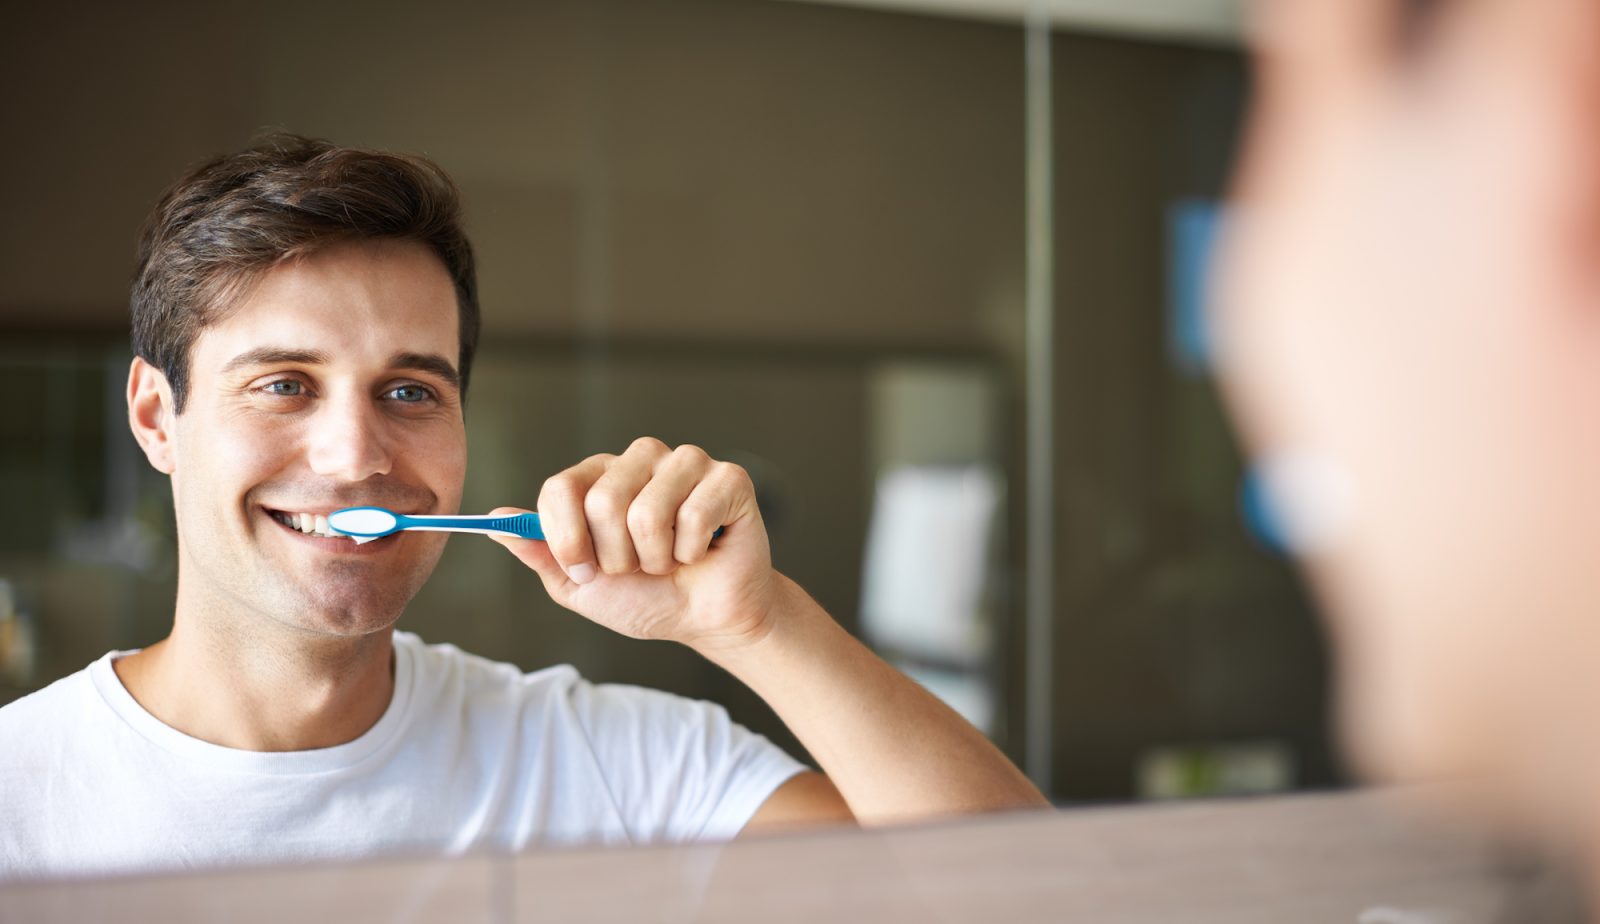 Maintain a Consistent Oral Hygiene Routine